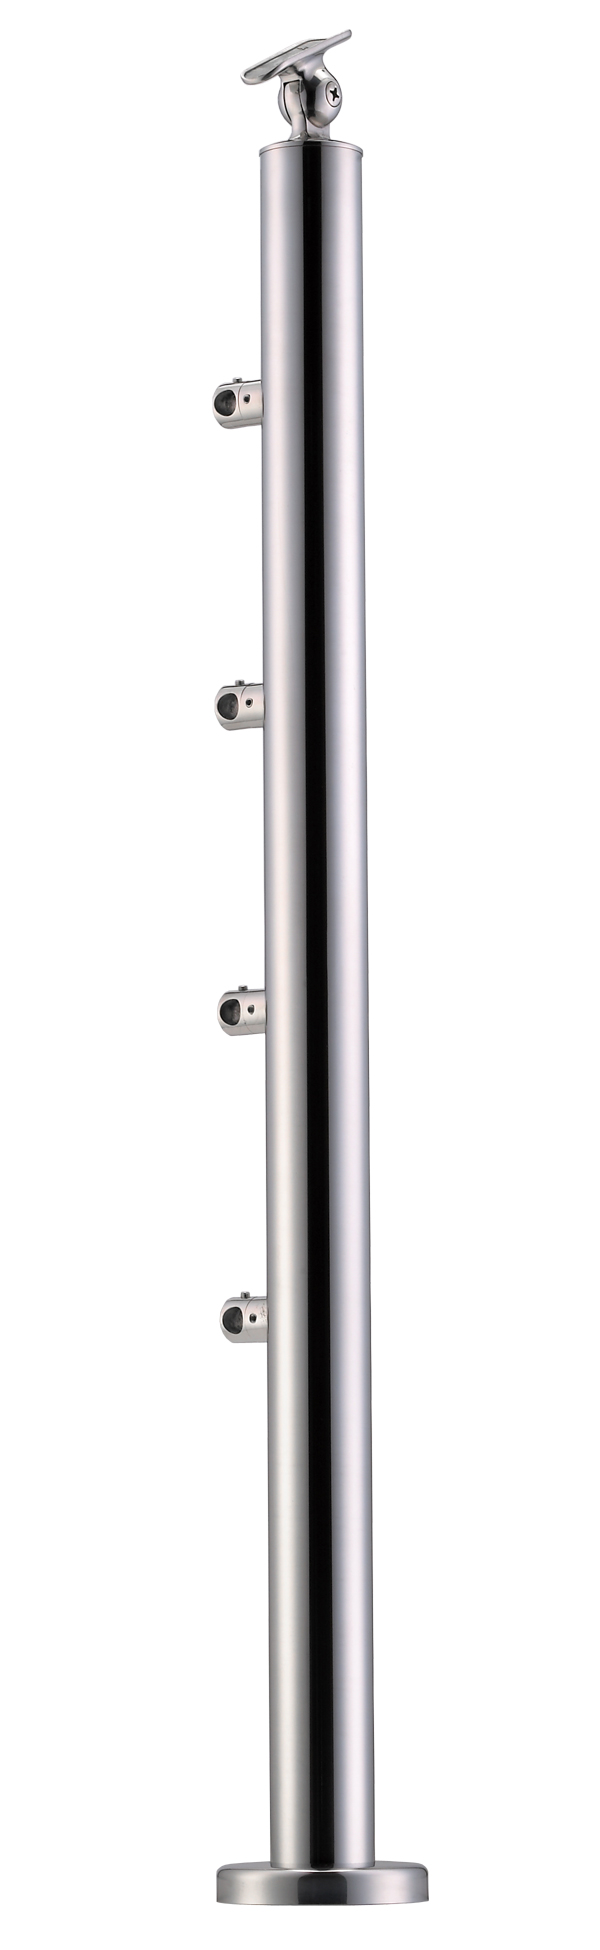 Stainless Steel Balustrade Posts - Tubular - SS:2020457A